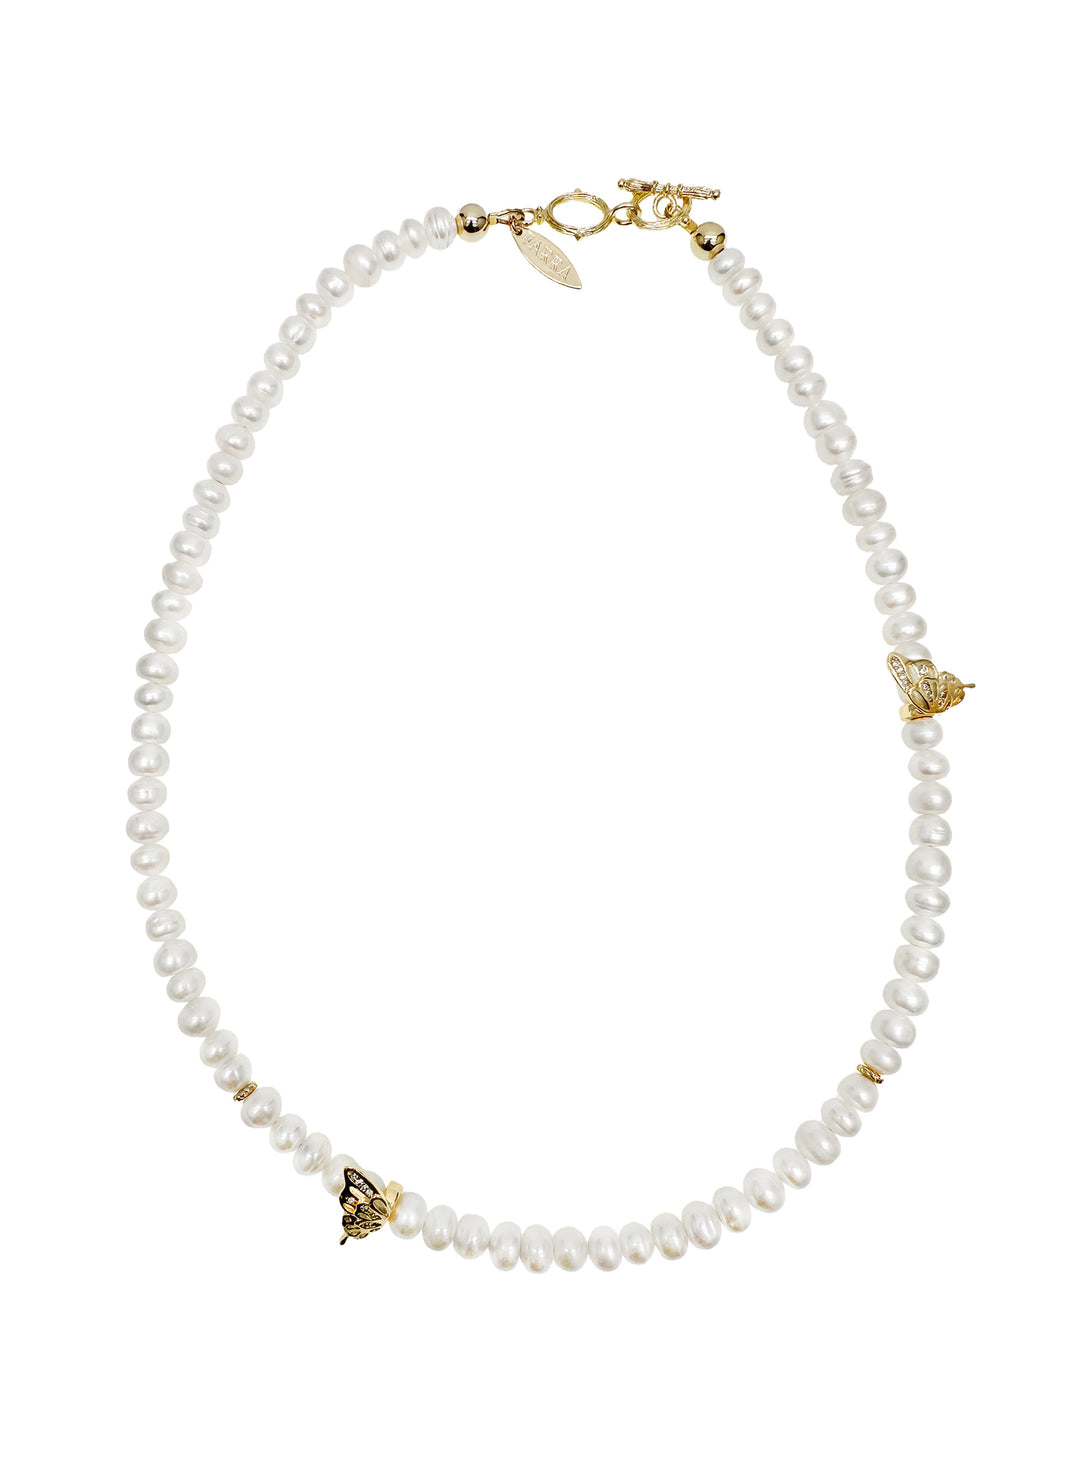 Freshwater Pearls with Butterfly Charm Necklace LN059 - FARRA